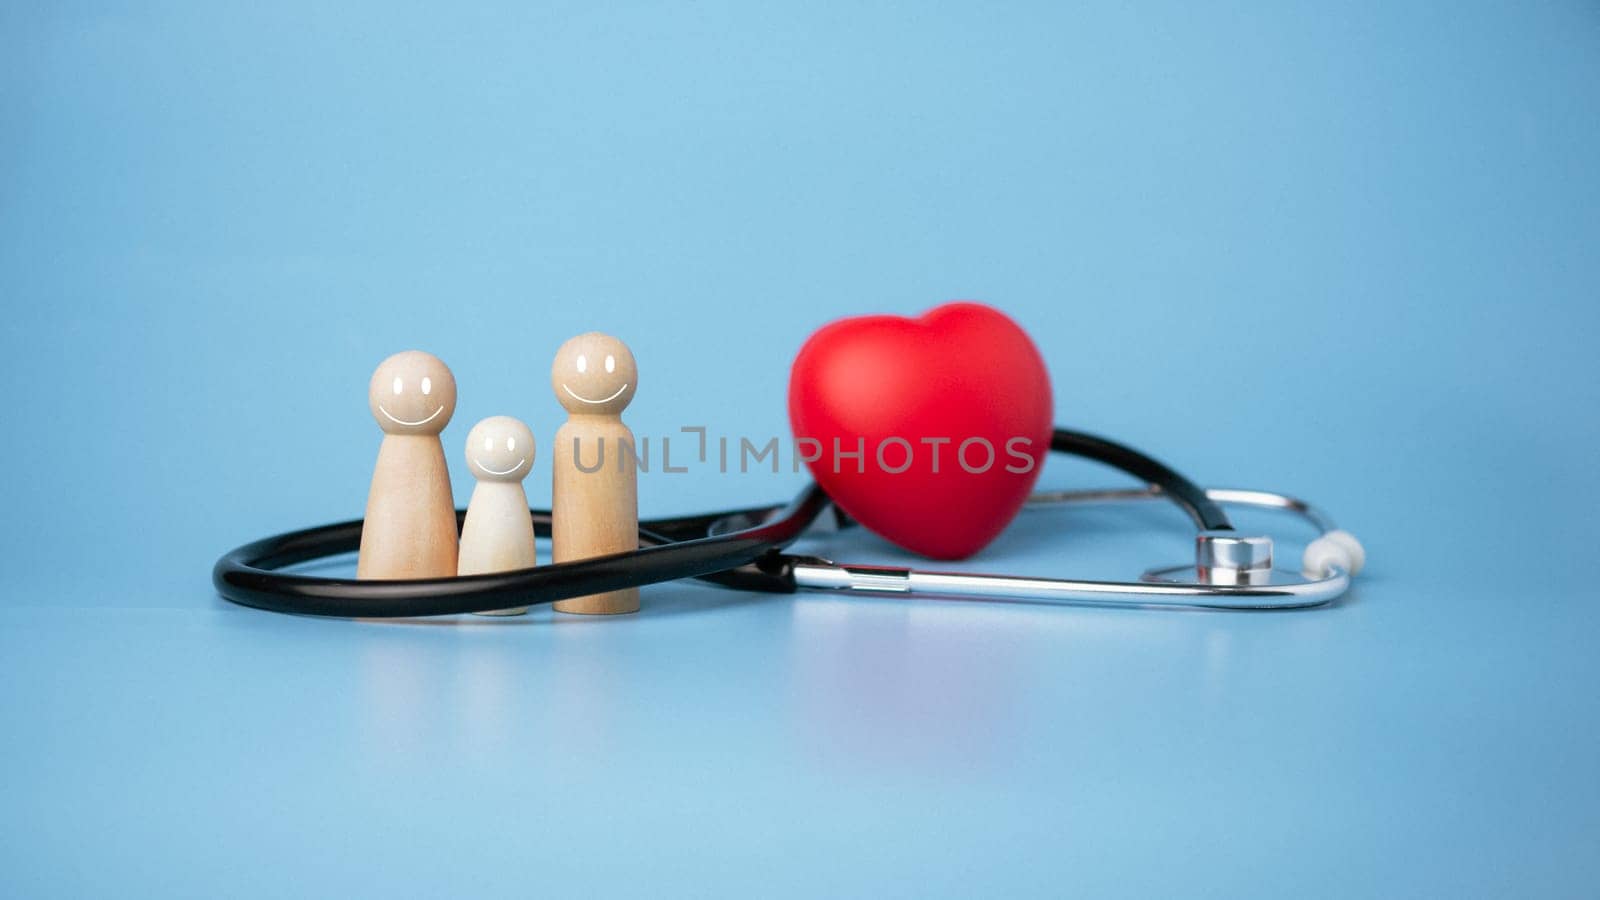 Concept of health insurance and medical welfare, wooden doll and red heart with stethoscope on blue background, health insurance and access to healthcare. by Unimages2527